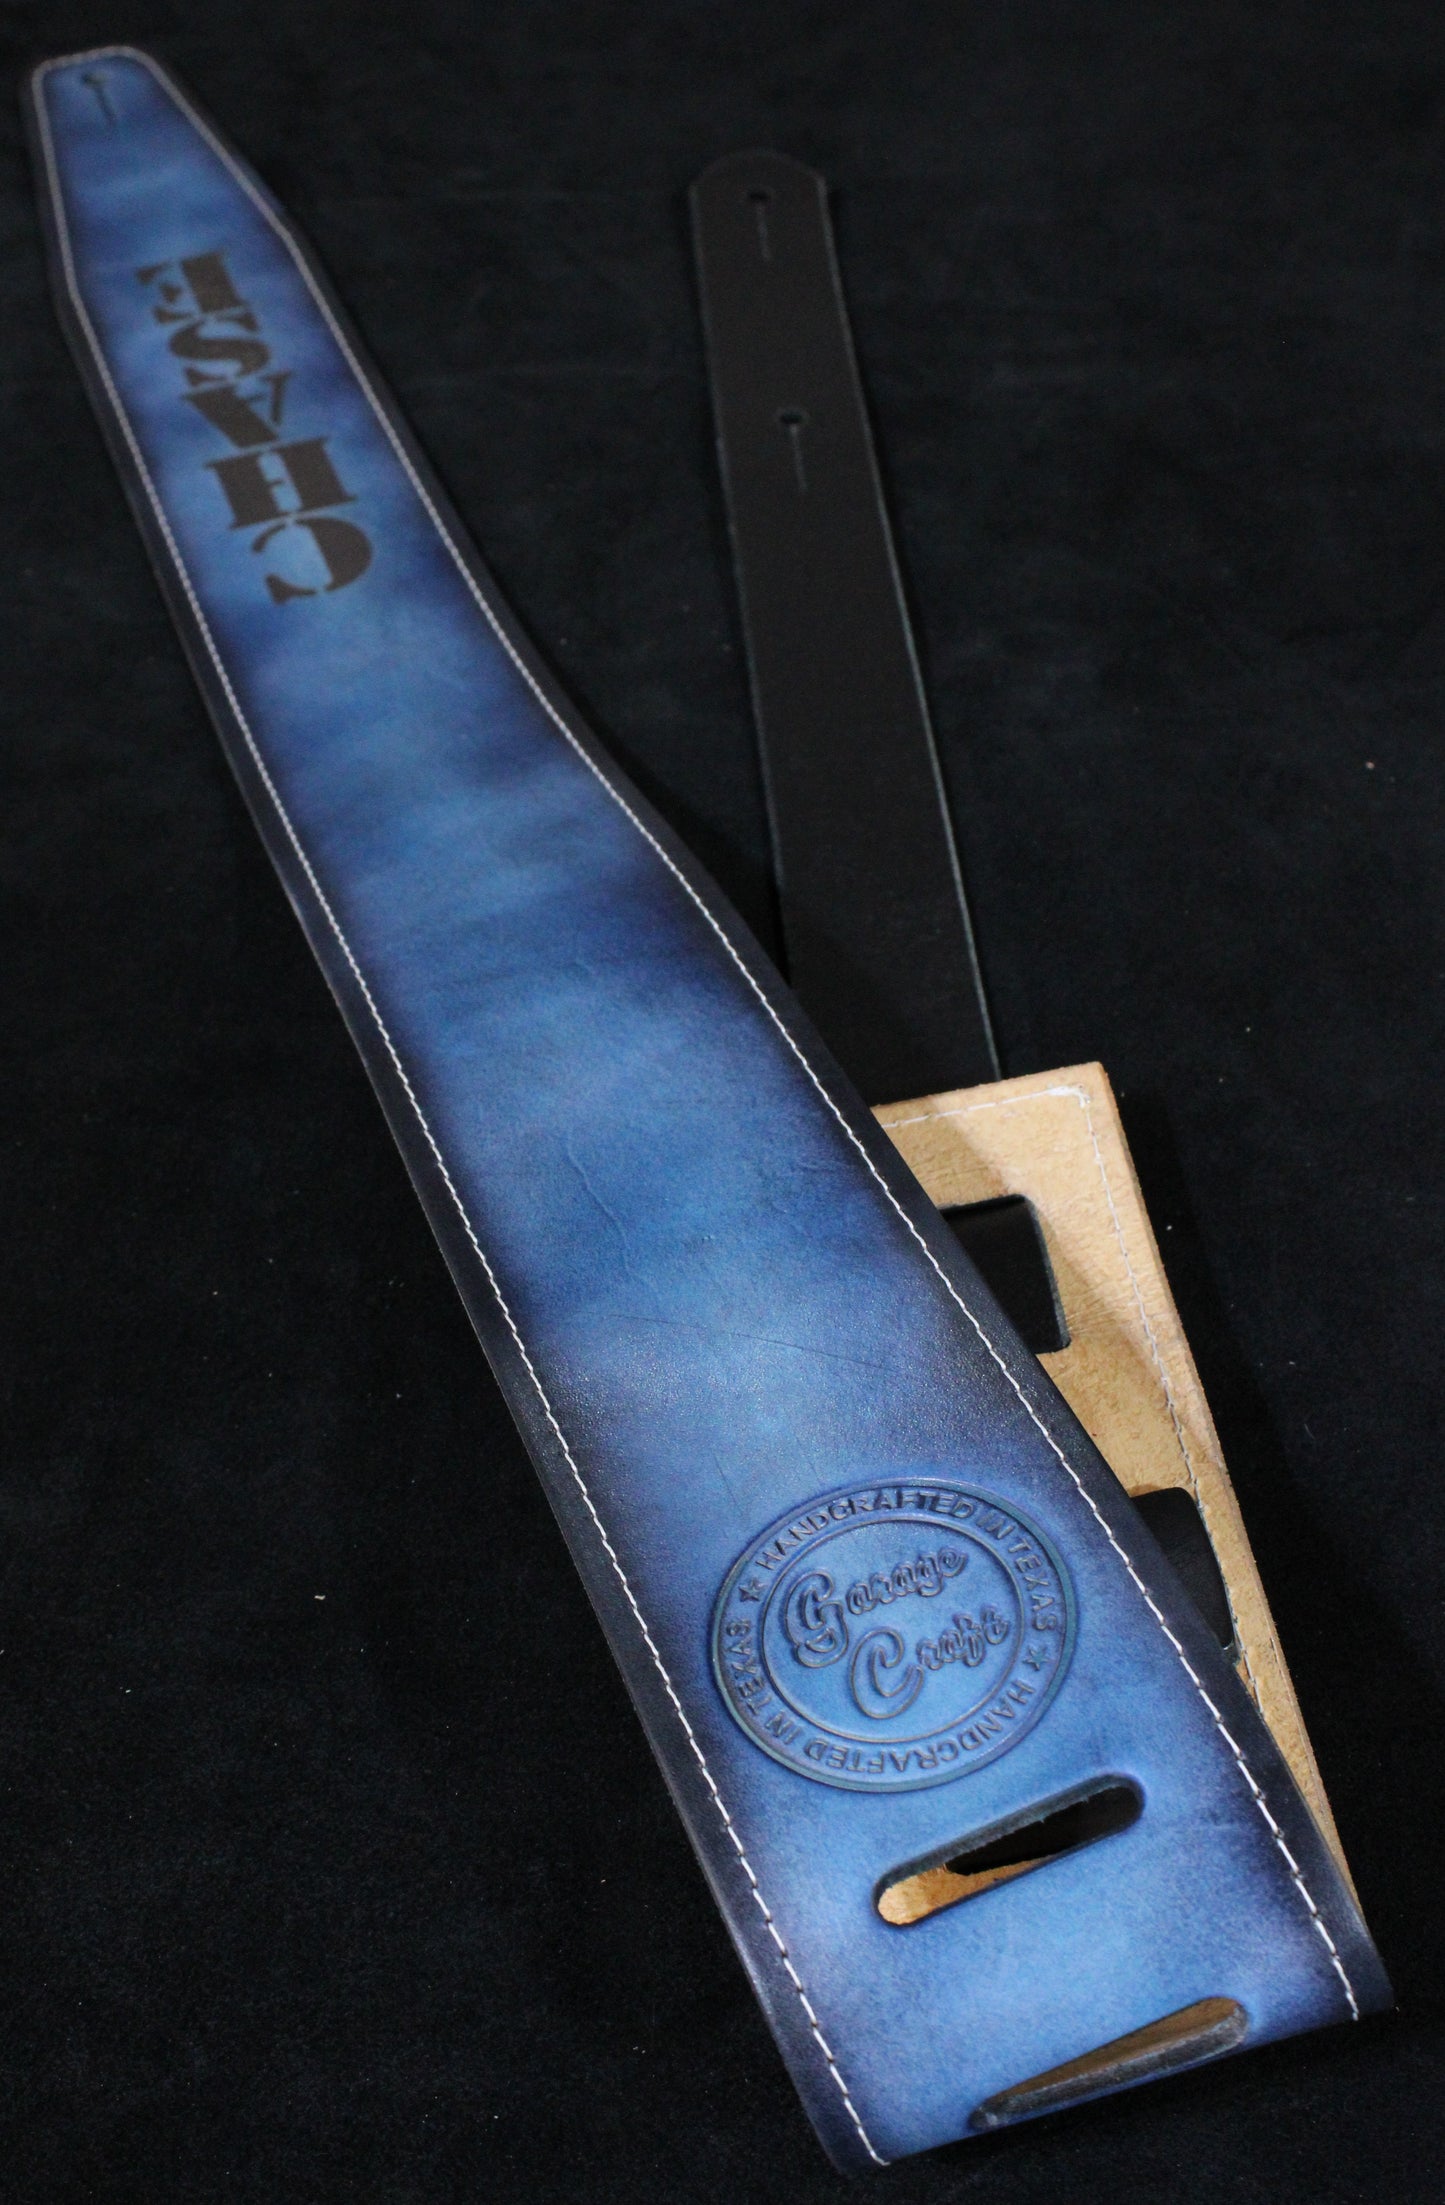 Stitched blue leather guitar strap